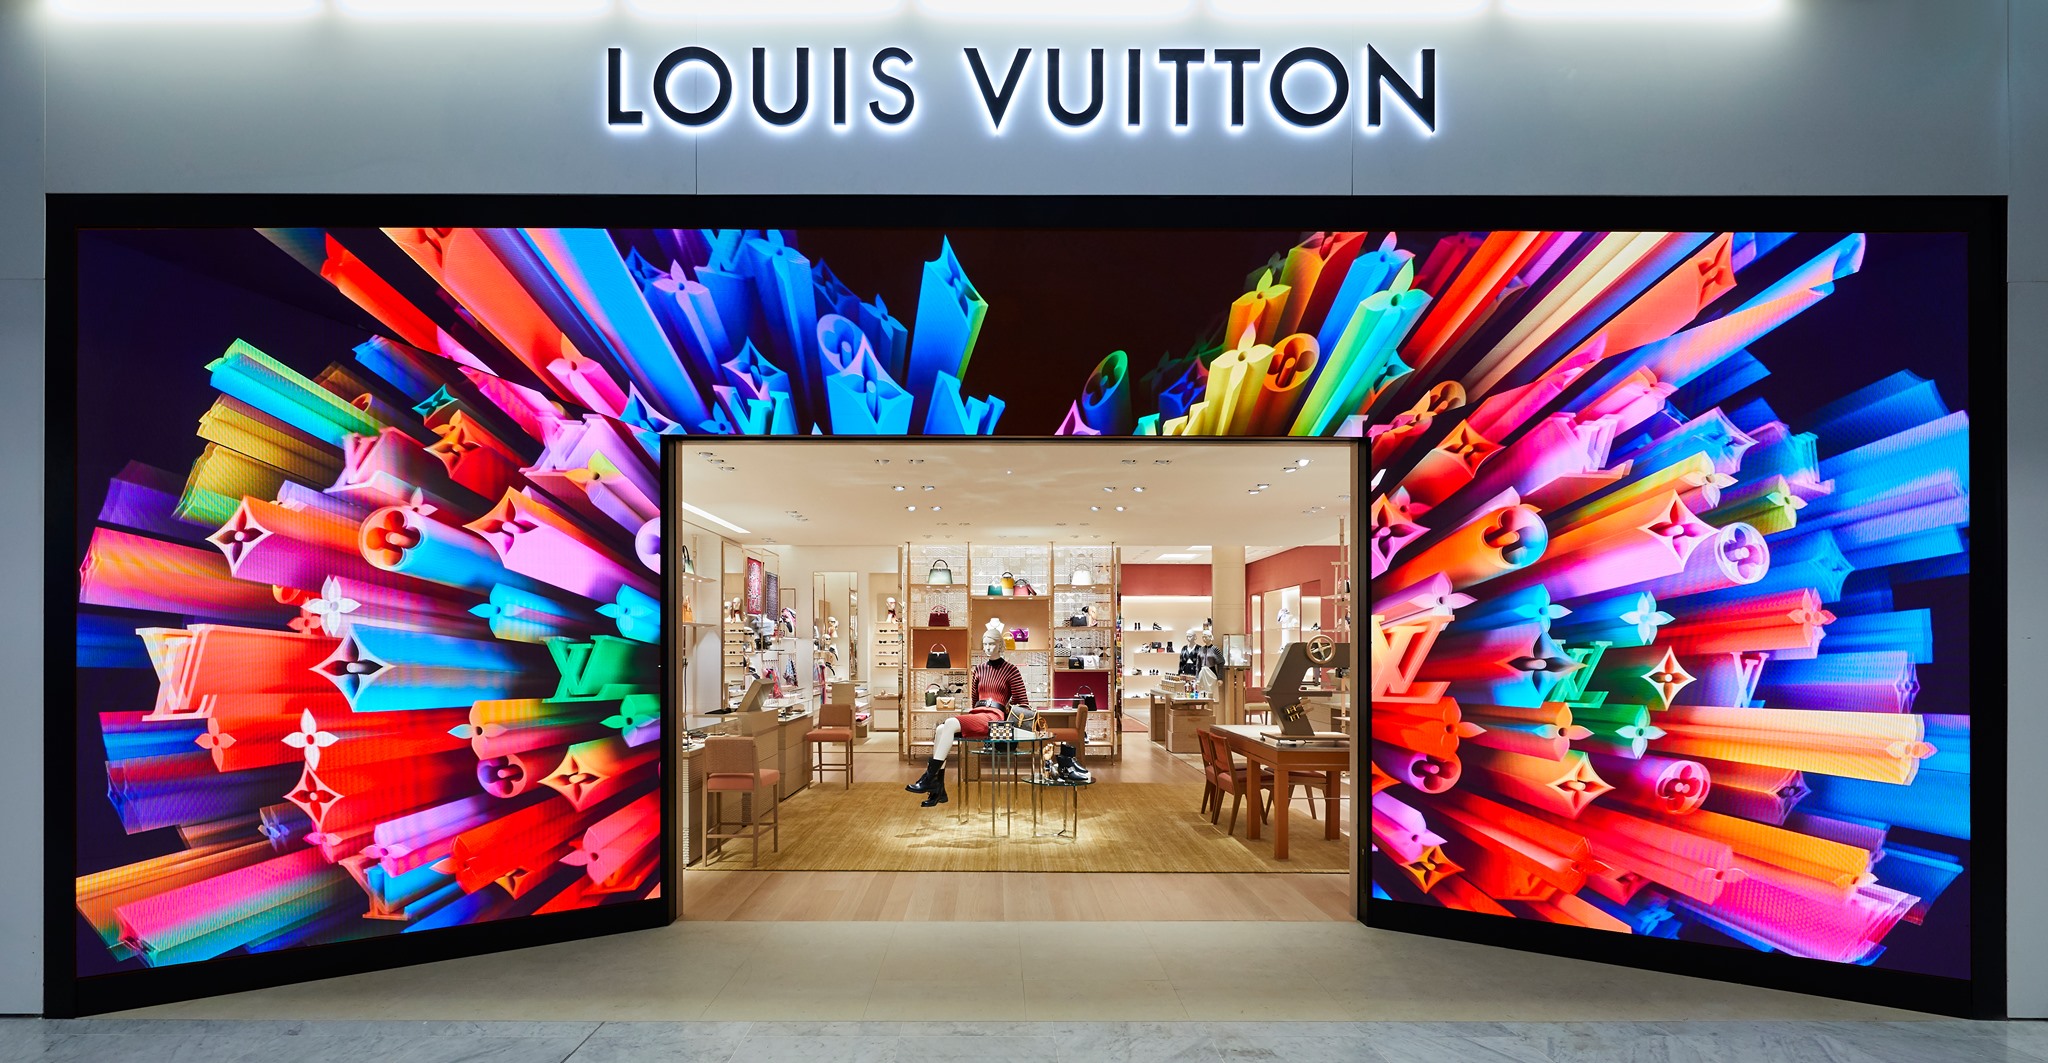 louis vuitton hours today